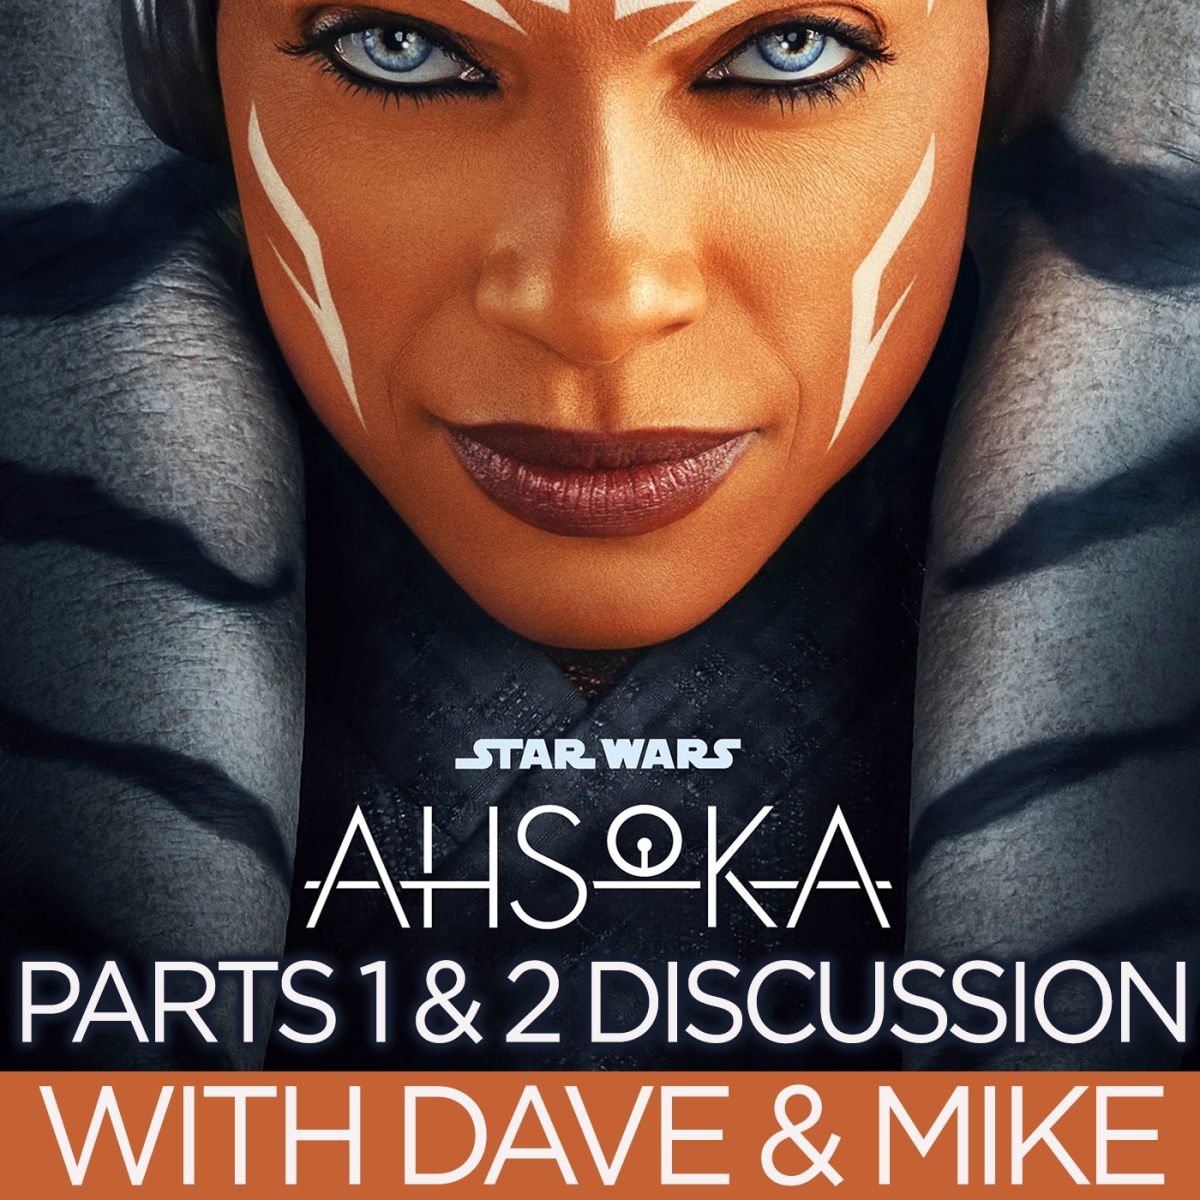 Ahsoka Parts 1 & 2 Discussion: Do The Animated Characters Work In Live-Action? Plus The Blood Orange Bunch, Droids, Rebels, The Dark Side, Easter Eggs & More! With Dave & Mike